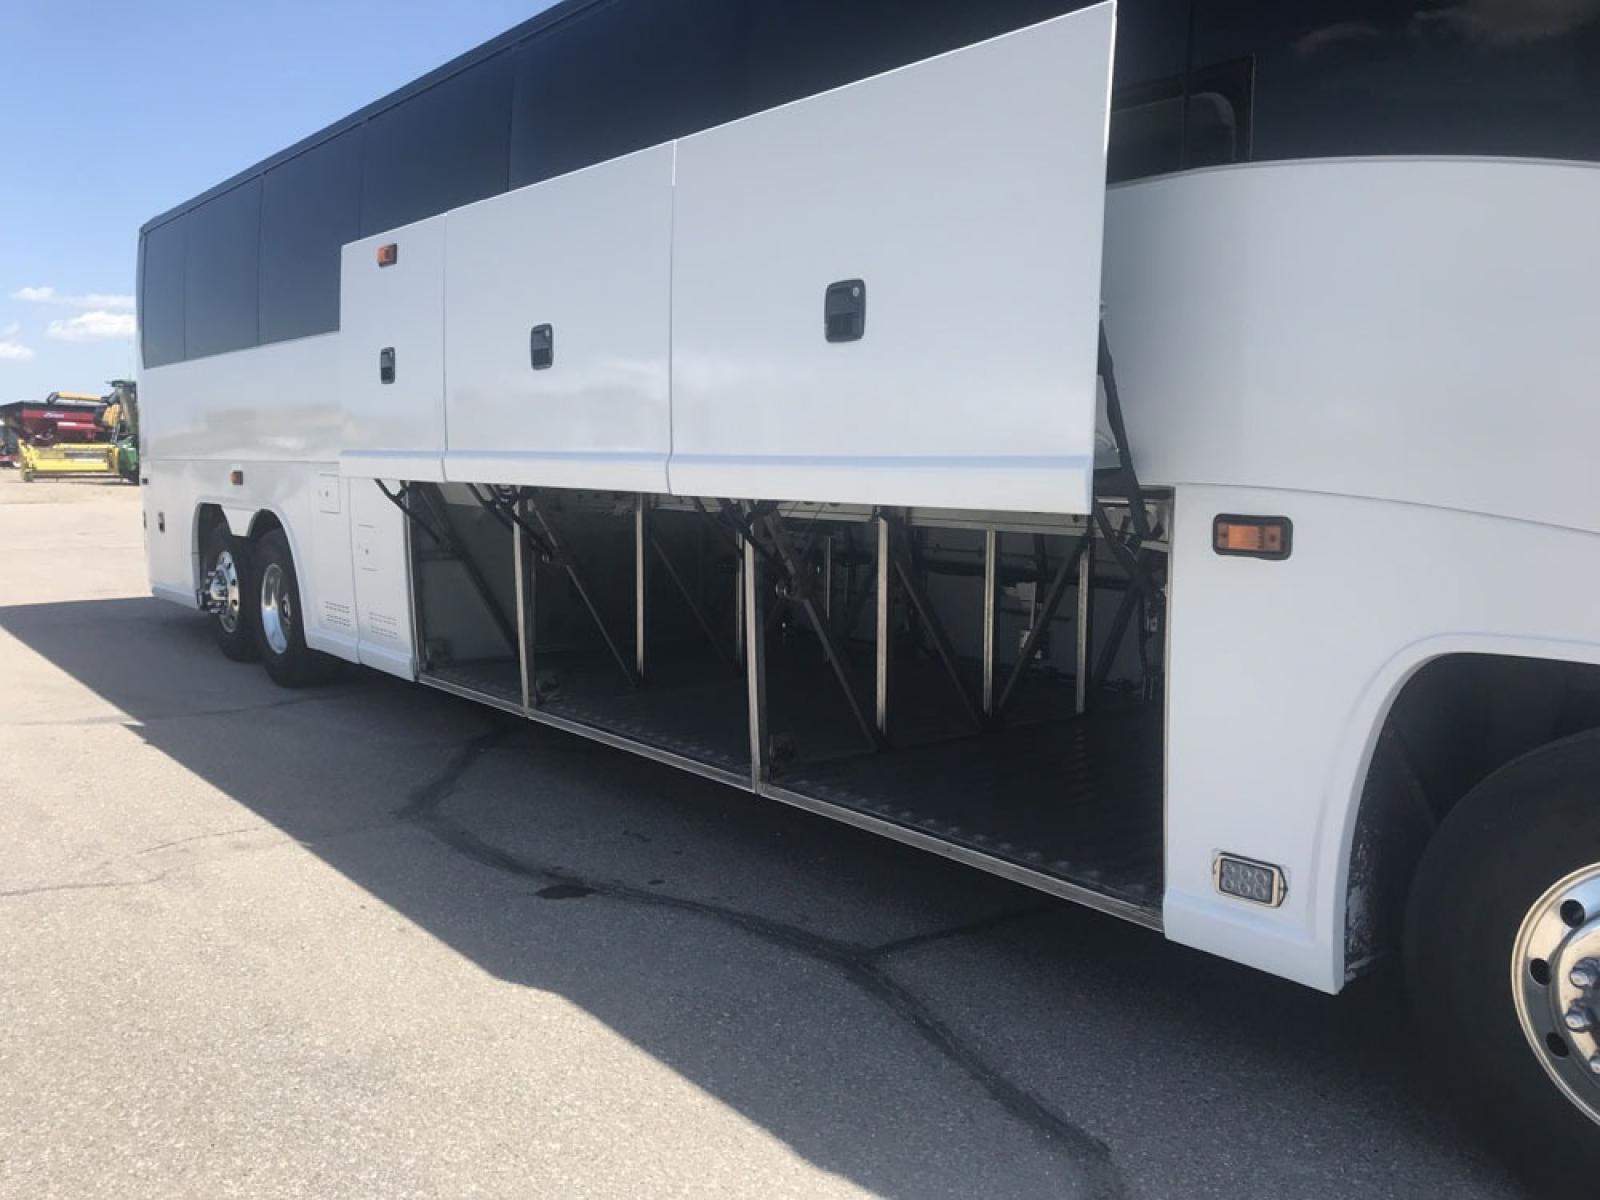 2008 White MCI J4500 with an Cummins ISM engine, ZF AUTO transmission, 0.000000, 0.000000 - 2008 MCI J4500 - Cummins ISM Diesel Engine - ZF Auto Trans. - 45' -- 56 Passengers -- Seat Belts - Flat Screens and DVD - Aluminum Wheels - Enclosed parcel racks – Restroom - Photo #6